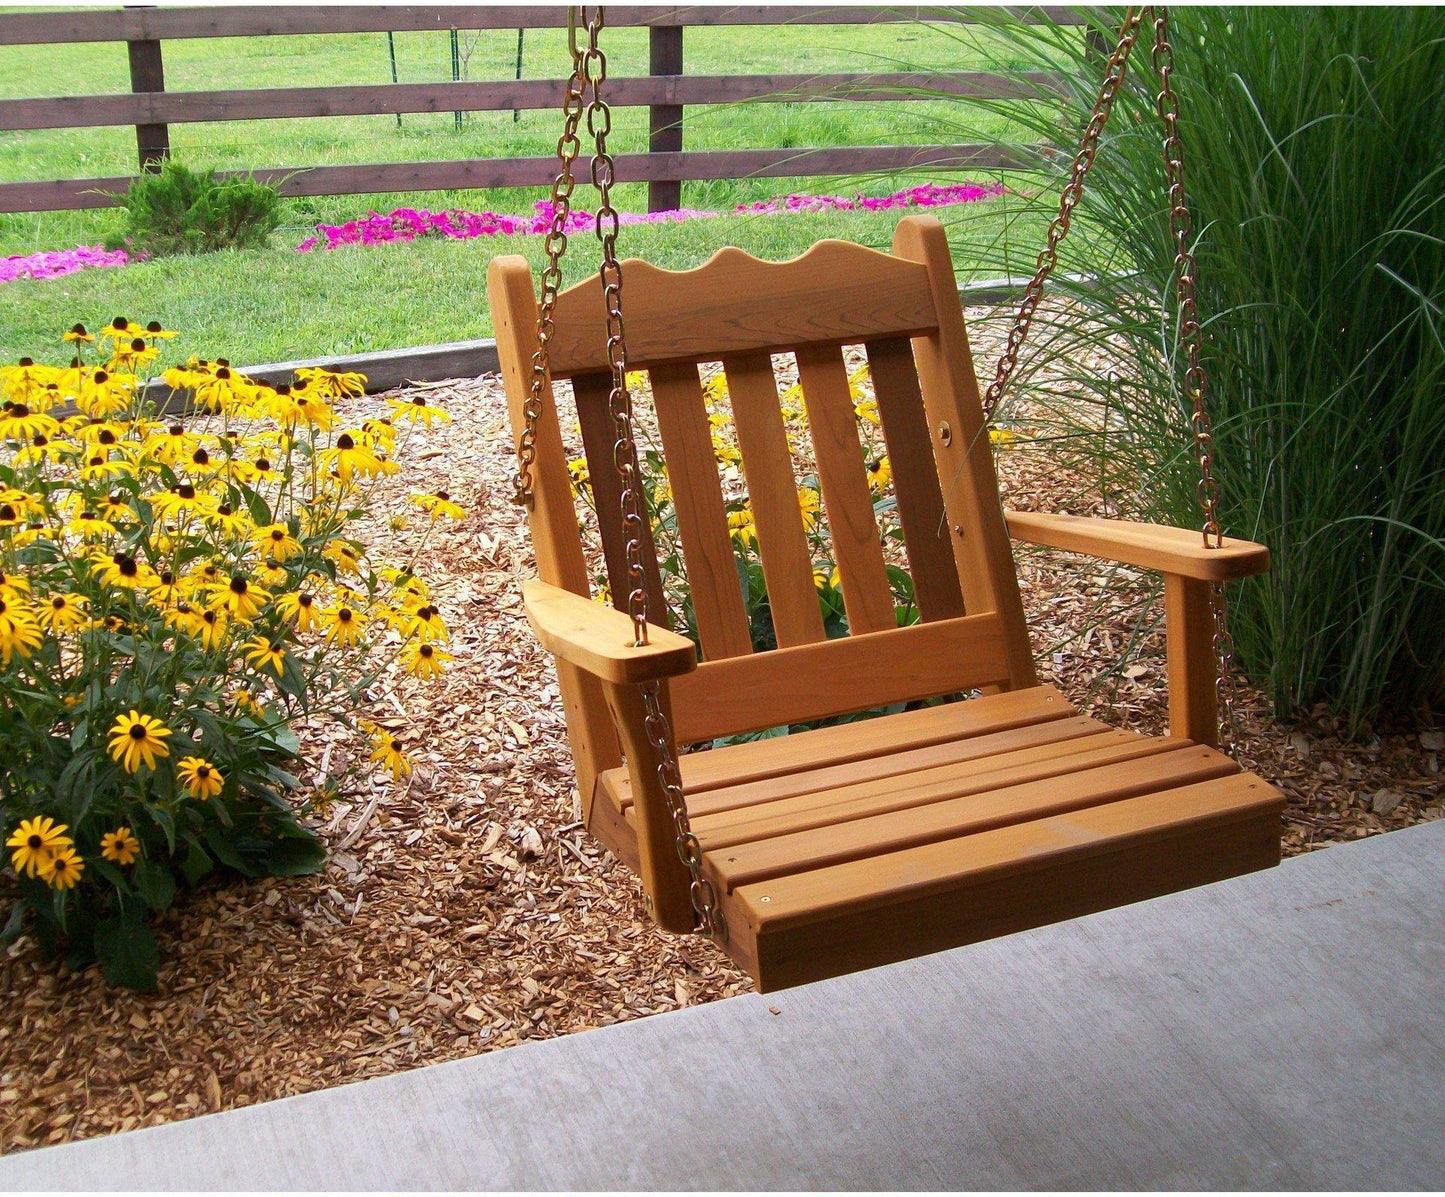 A & L FURNITURE CO. Western Red Cedar 2' Royal English Chair Swing  - Ships FREE in 5-7 Business days - Rocking Furniture